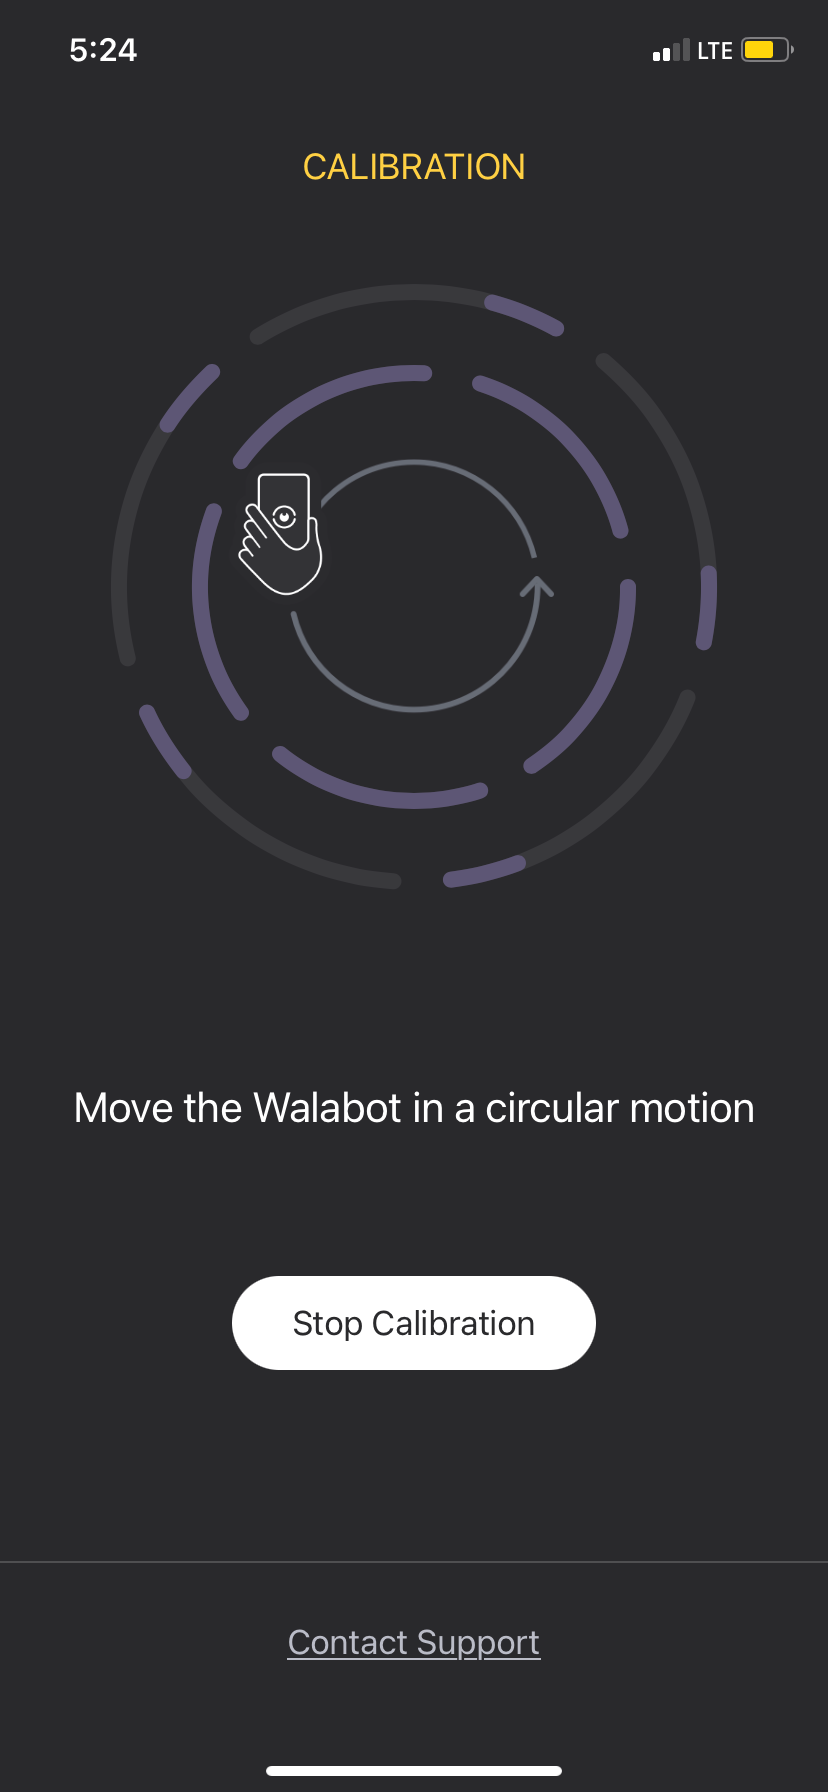 Walabot DIY Review: a smart stud finder for any smart home. - Gearbrain